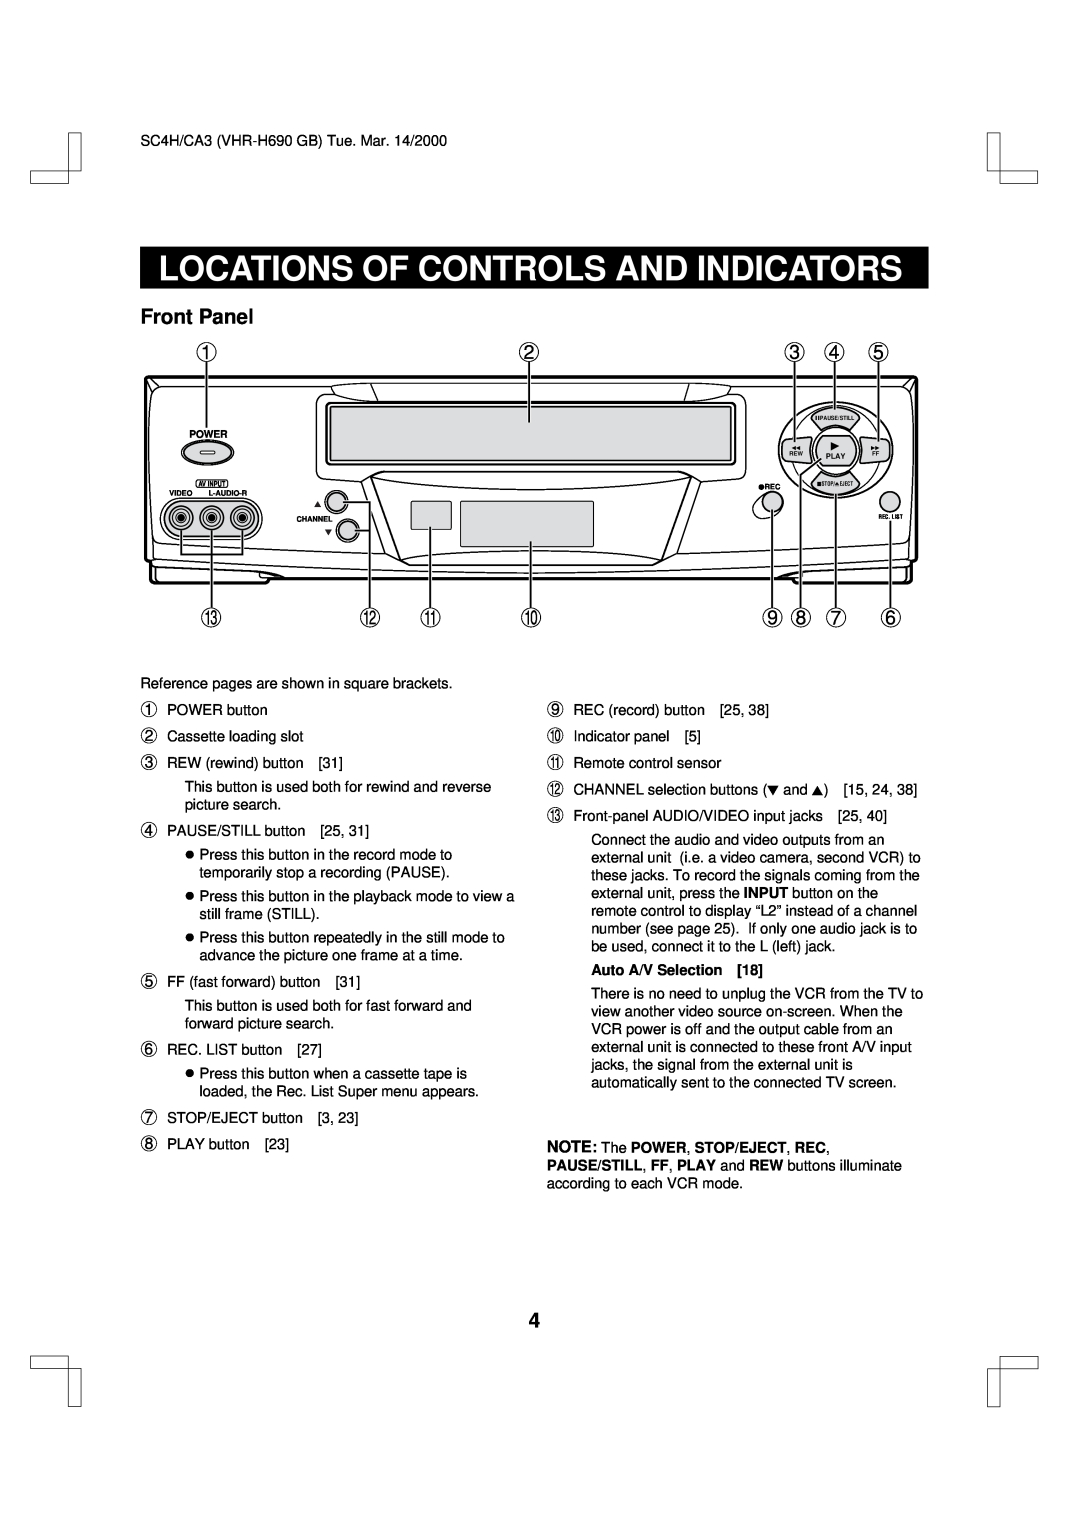 Sanyo VHR-H690 instruction manual Locations Of Controls And Indicators, Front Panel, 9 8 7, Auto A/V Selection 